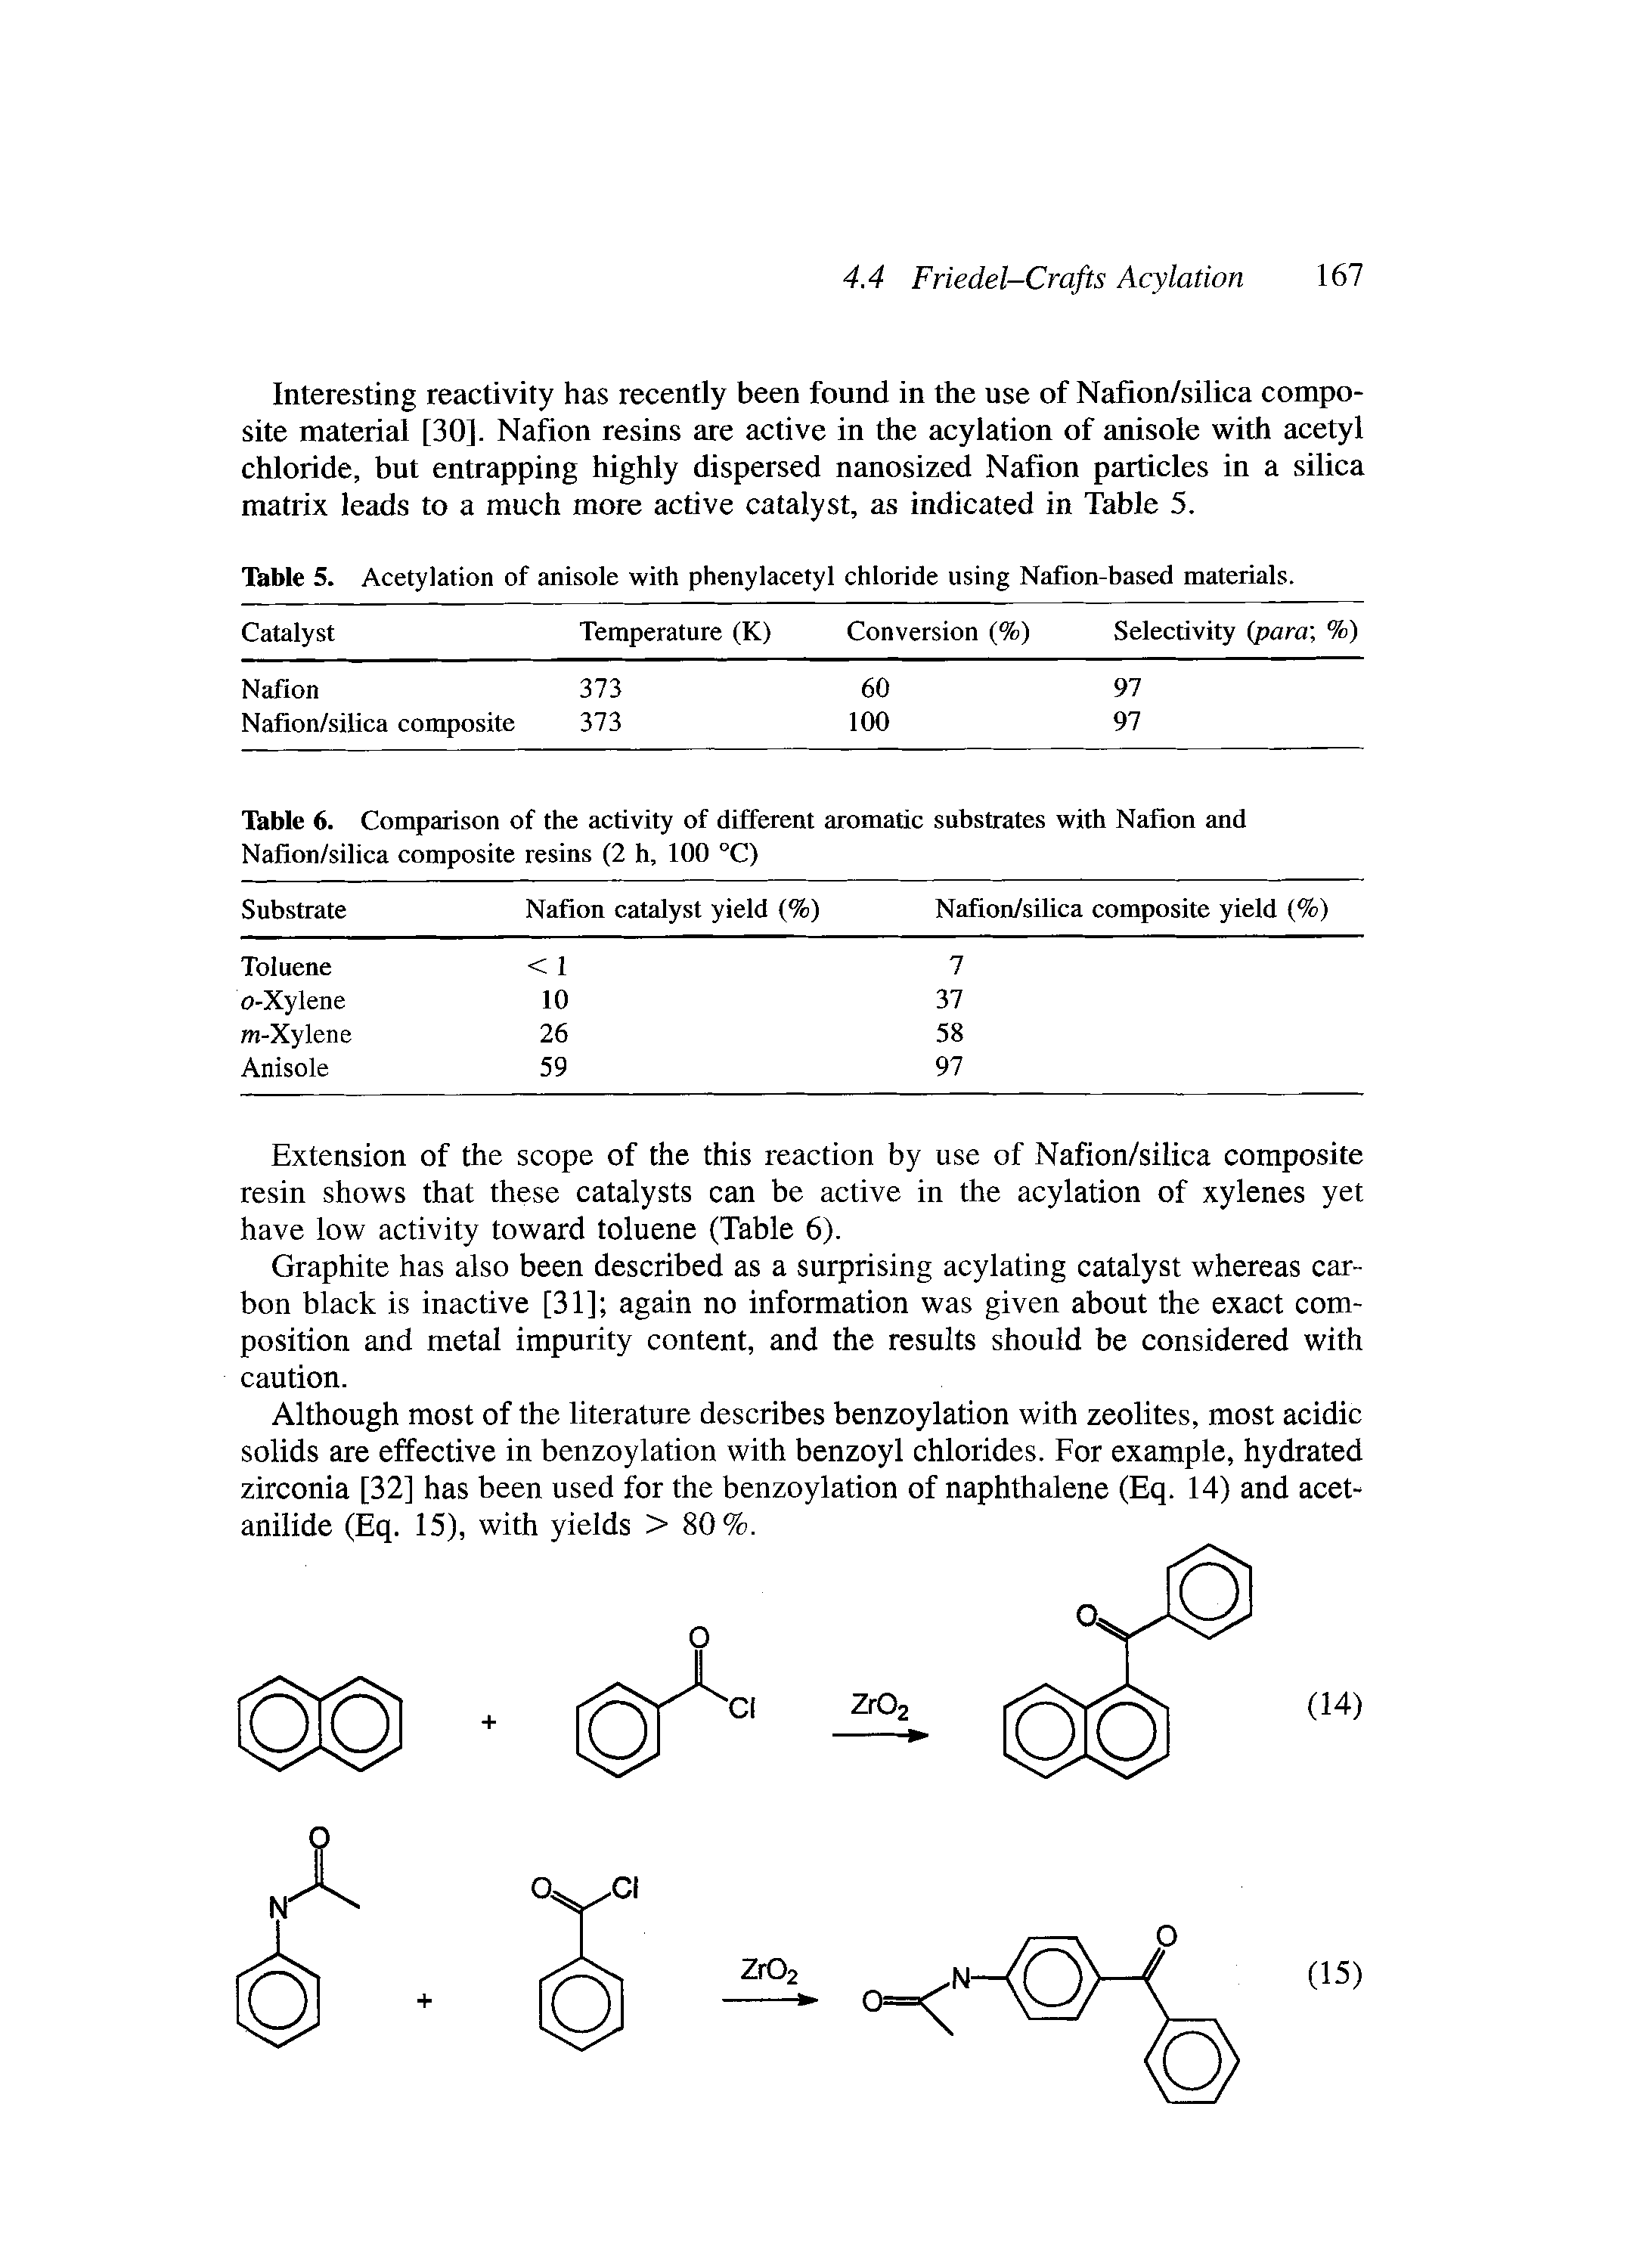 Table 5. Acetylation of anisole with phenylacetyl chloride using Nafion-based materials.